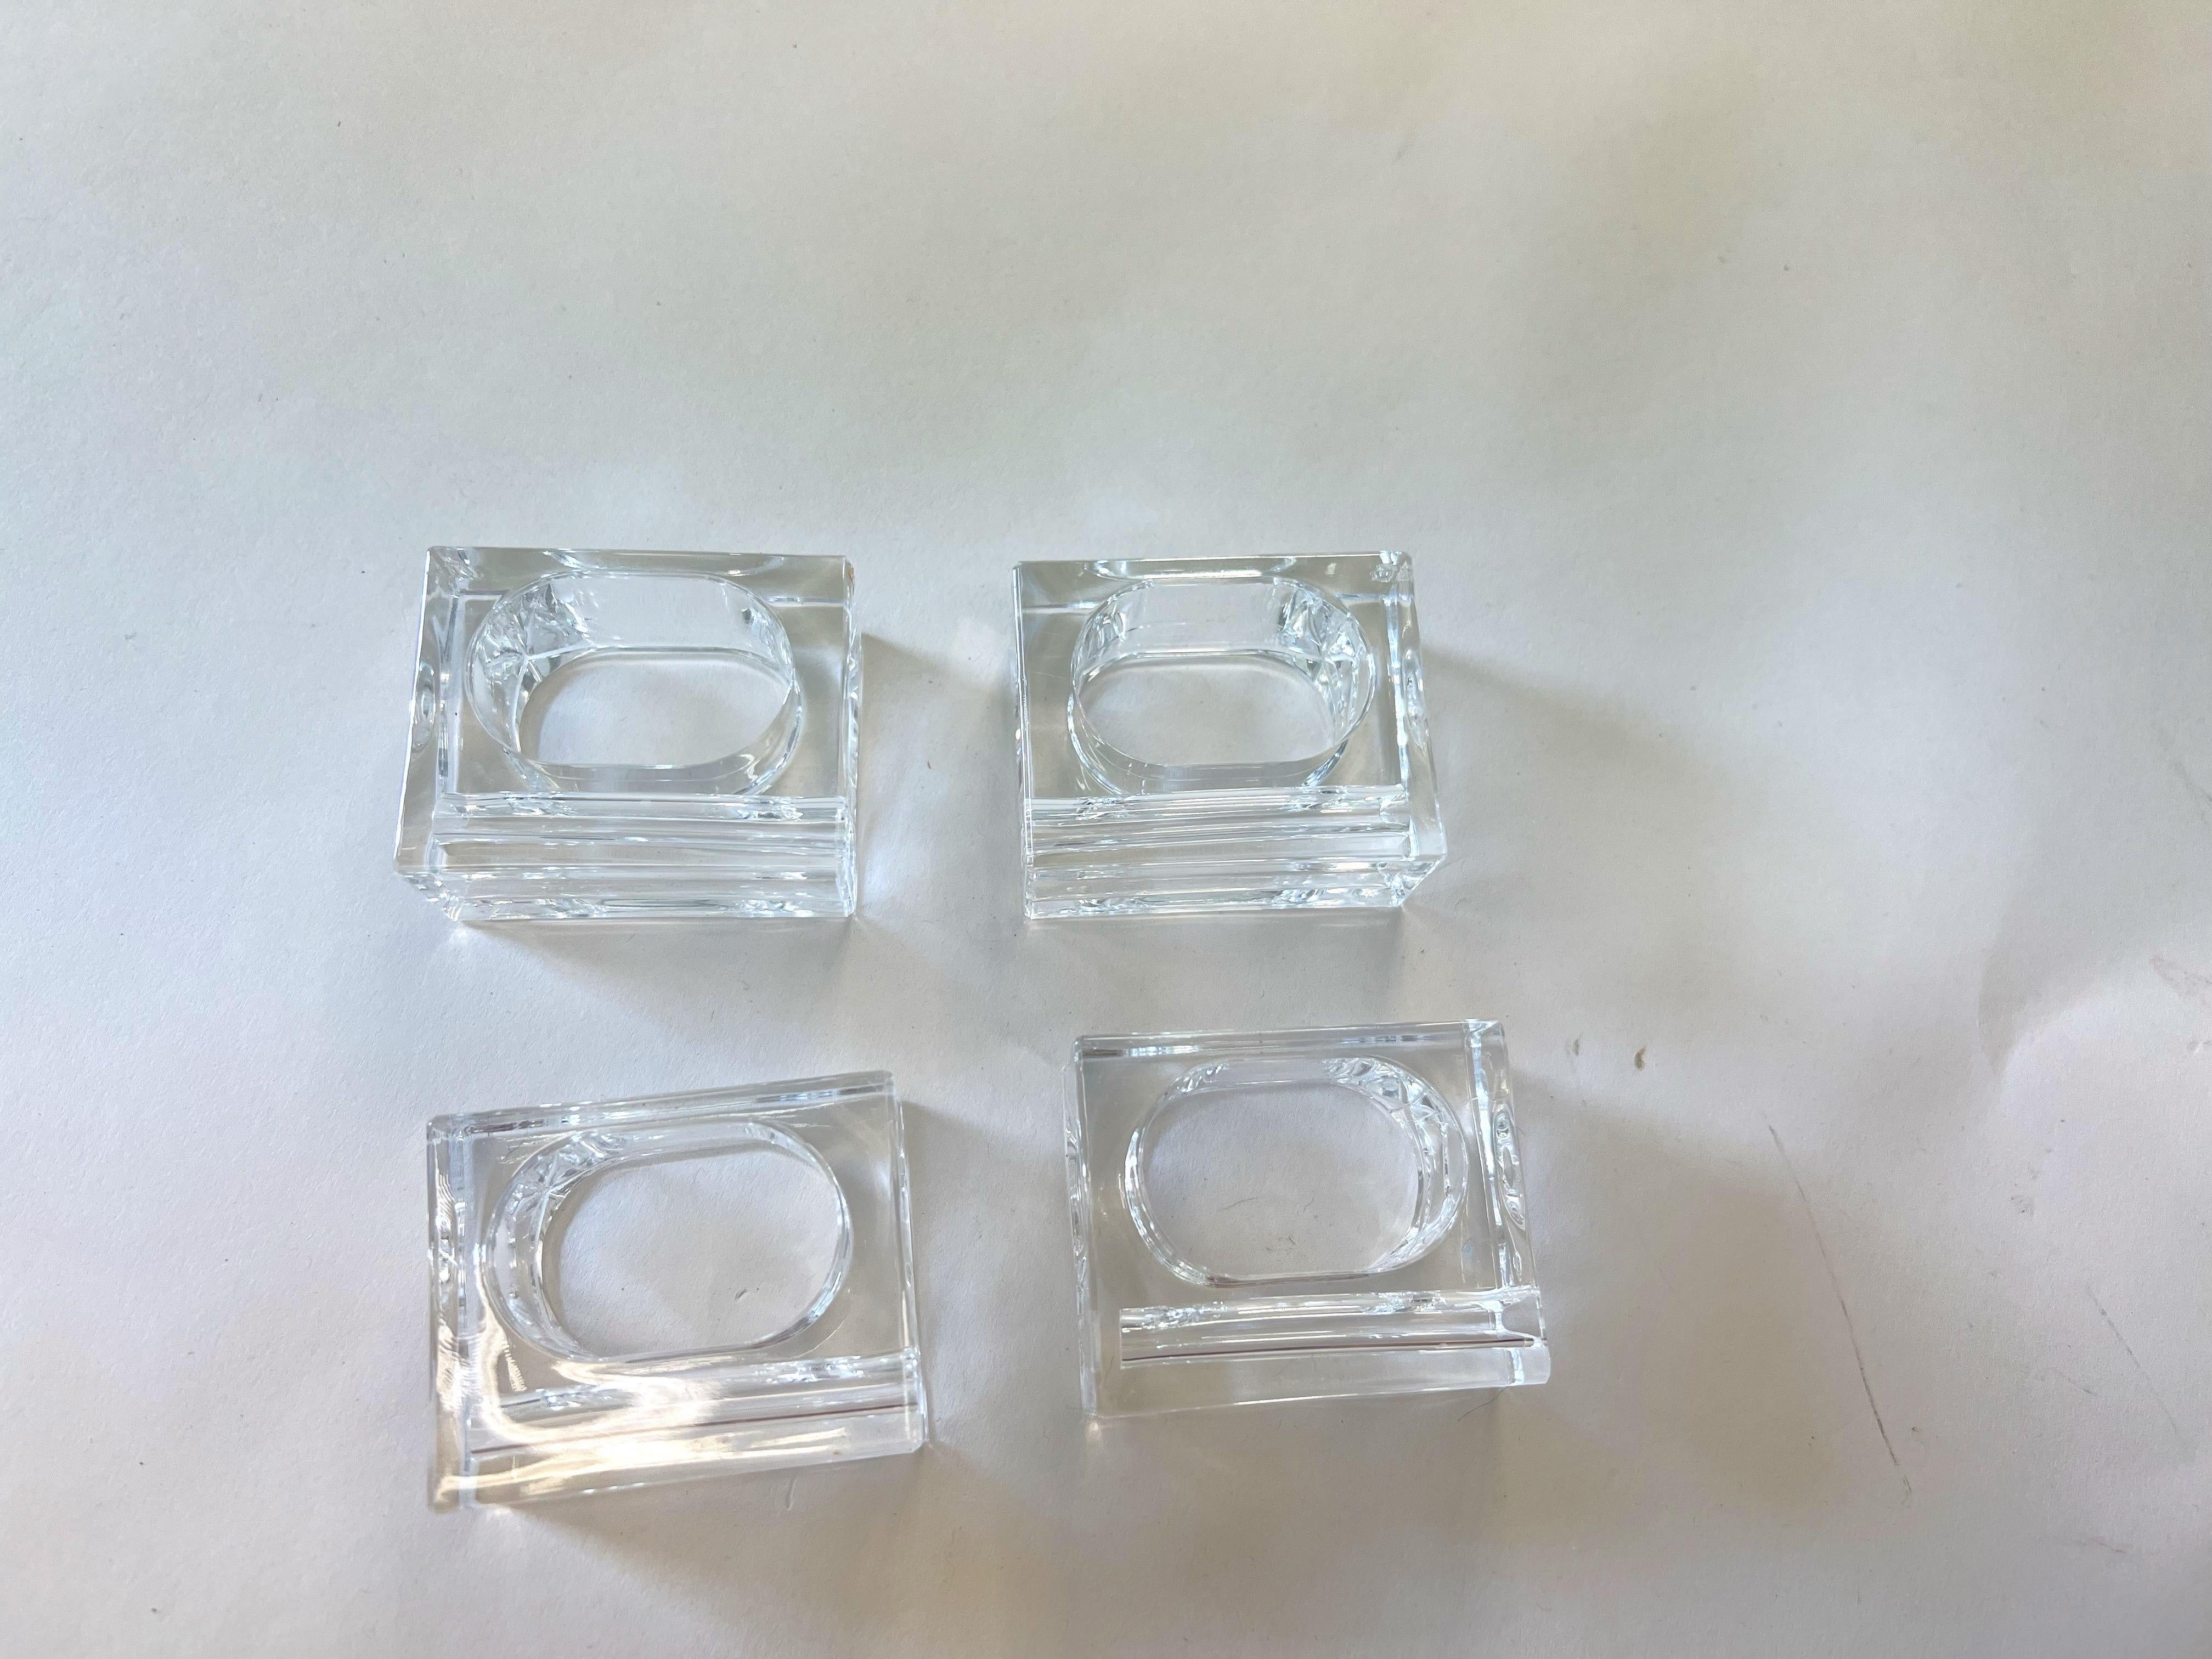 Stunning set of four Mid-Century Modern napkin rings or napkin holders with a geometric design. Rendered in polished transparent clear lucite. The design is rectangular in shape on the exterior with an oblong cut out for the napkin on the interior.